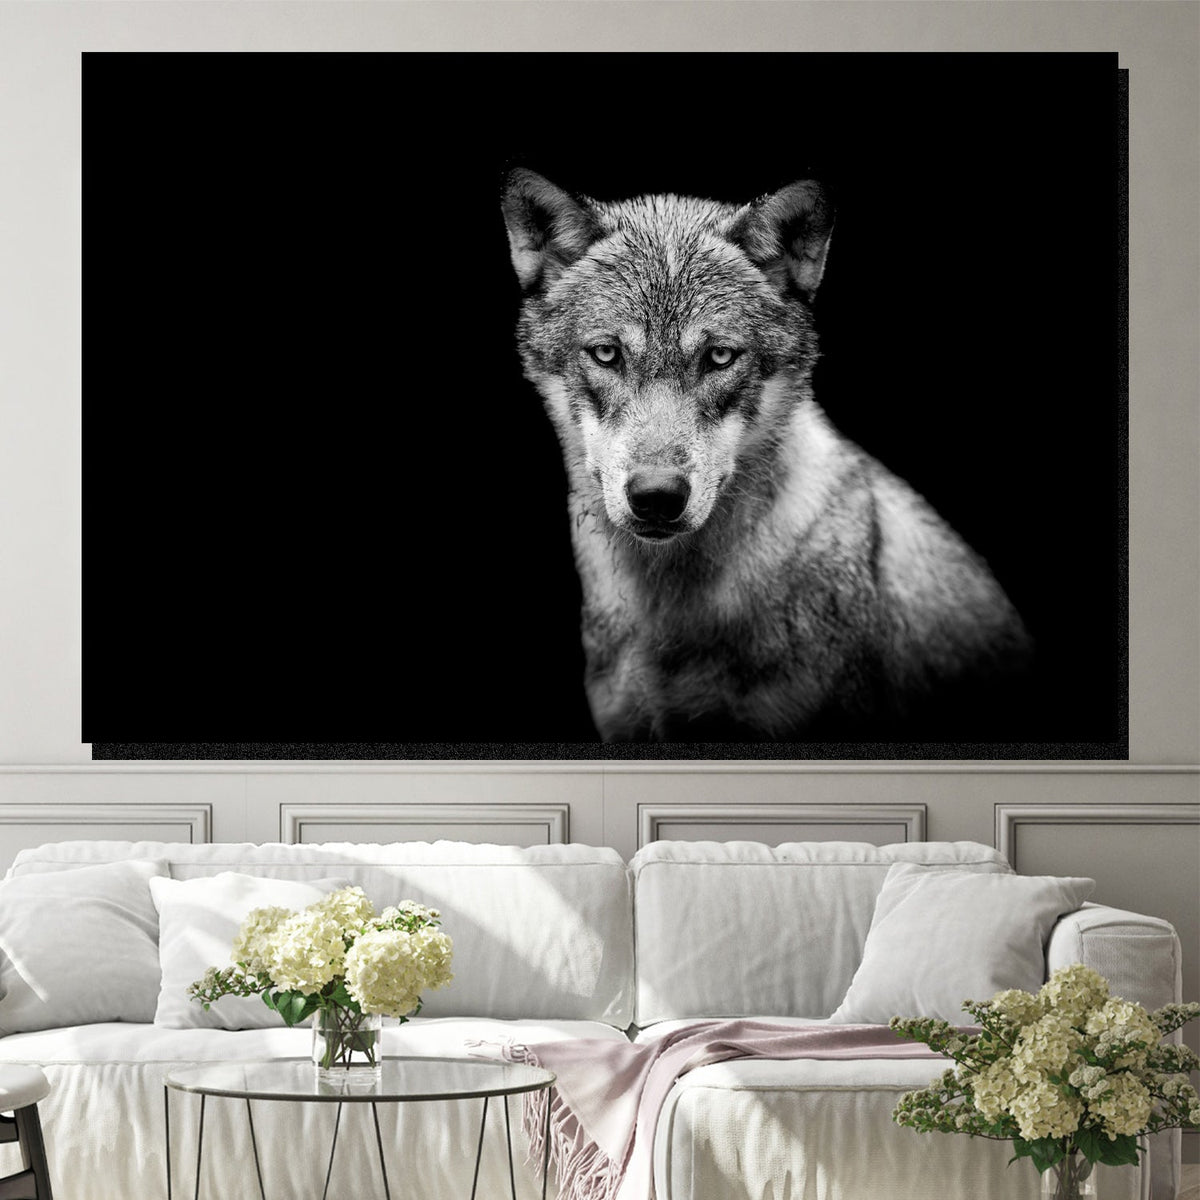 https://cdn.shopify.com/s/files/1/0387/9986/8044/products/YoungWolfCanvasArtprintStretched-1.jpg